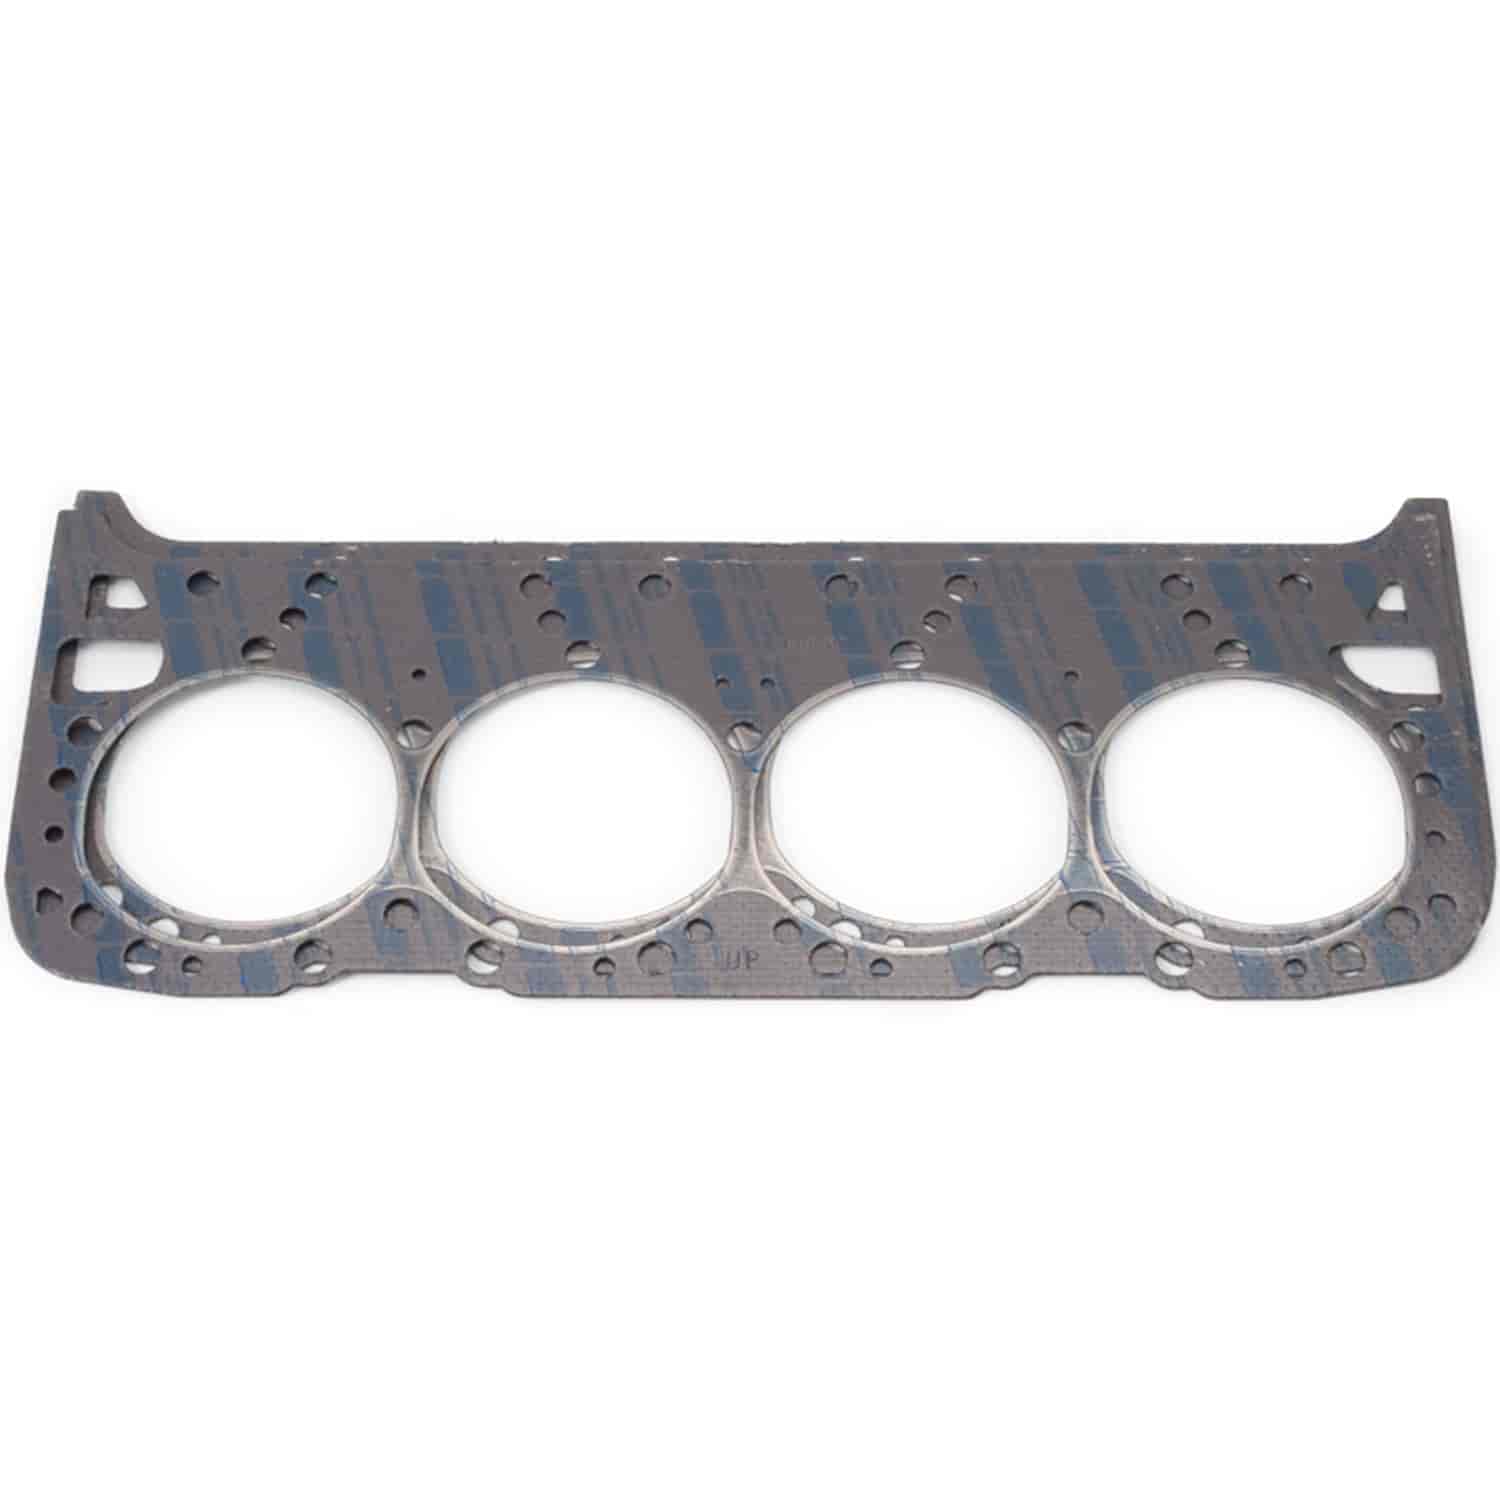 Head Gaskets for 1992-1997 Chevy LT1/LT4